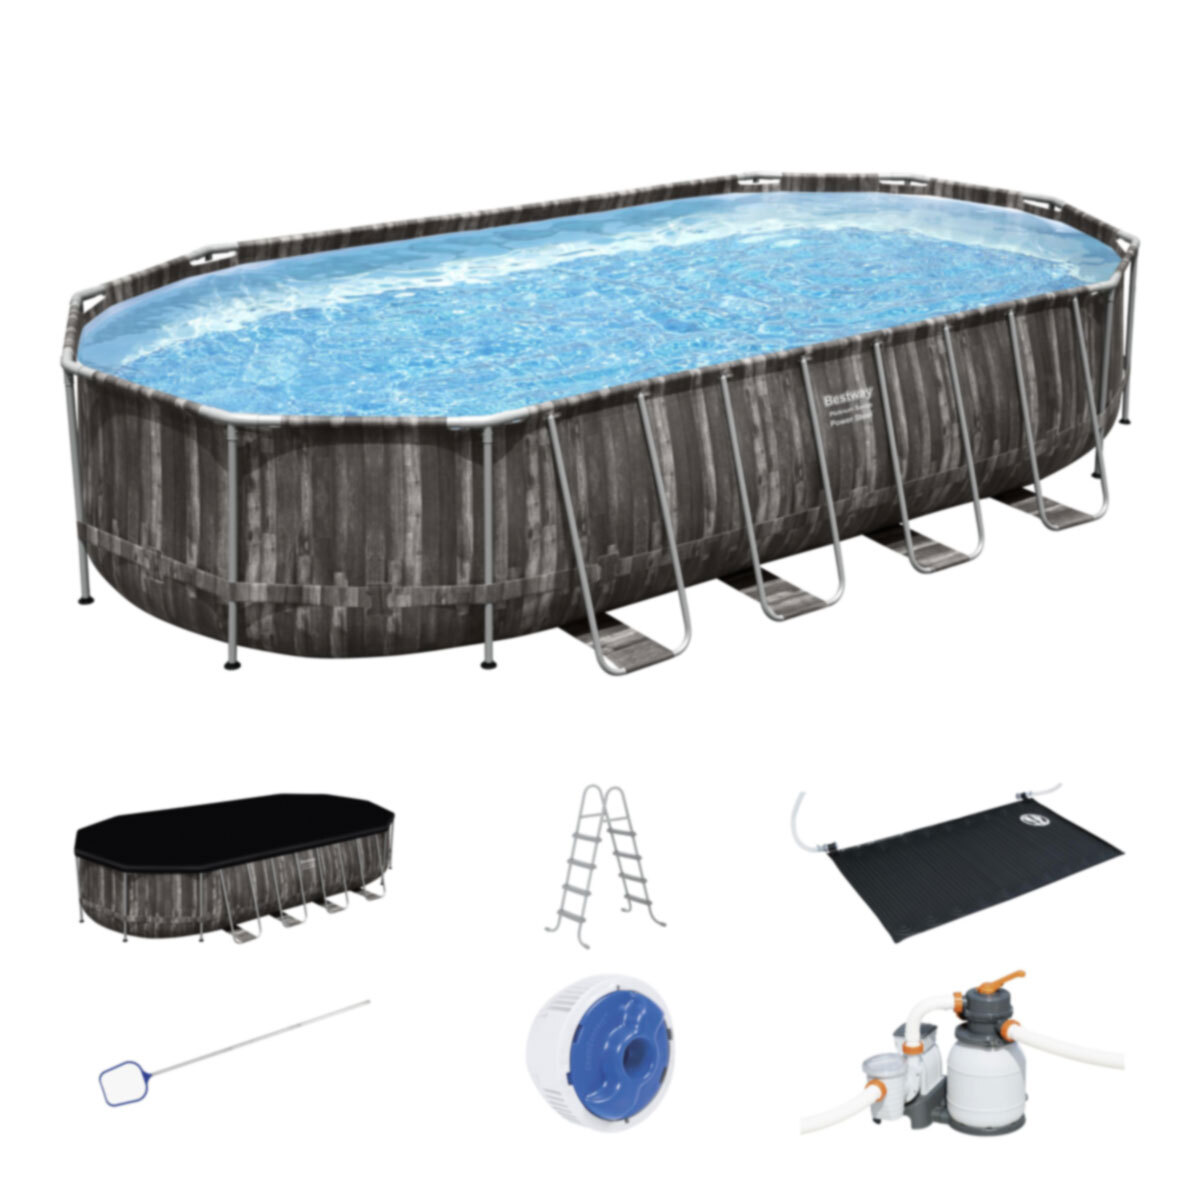 Bestway 22 x 12 ft Power Steel Oval Frame Pool with Sand Filter Pump, Solar Powered Pool Pad and